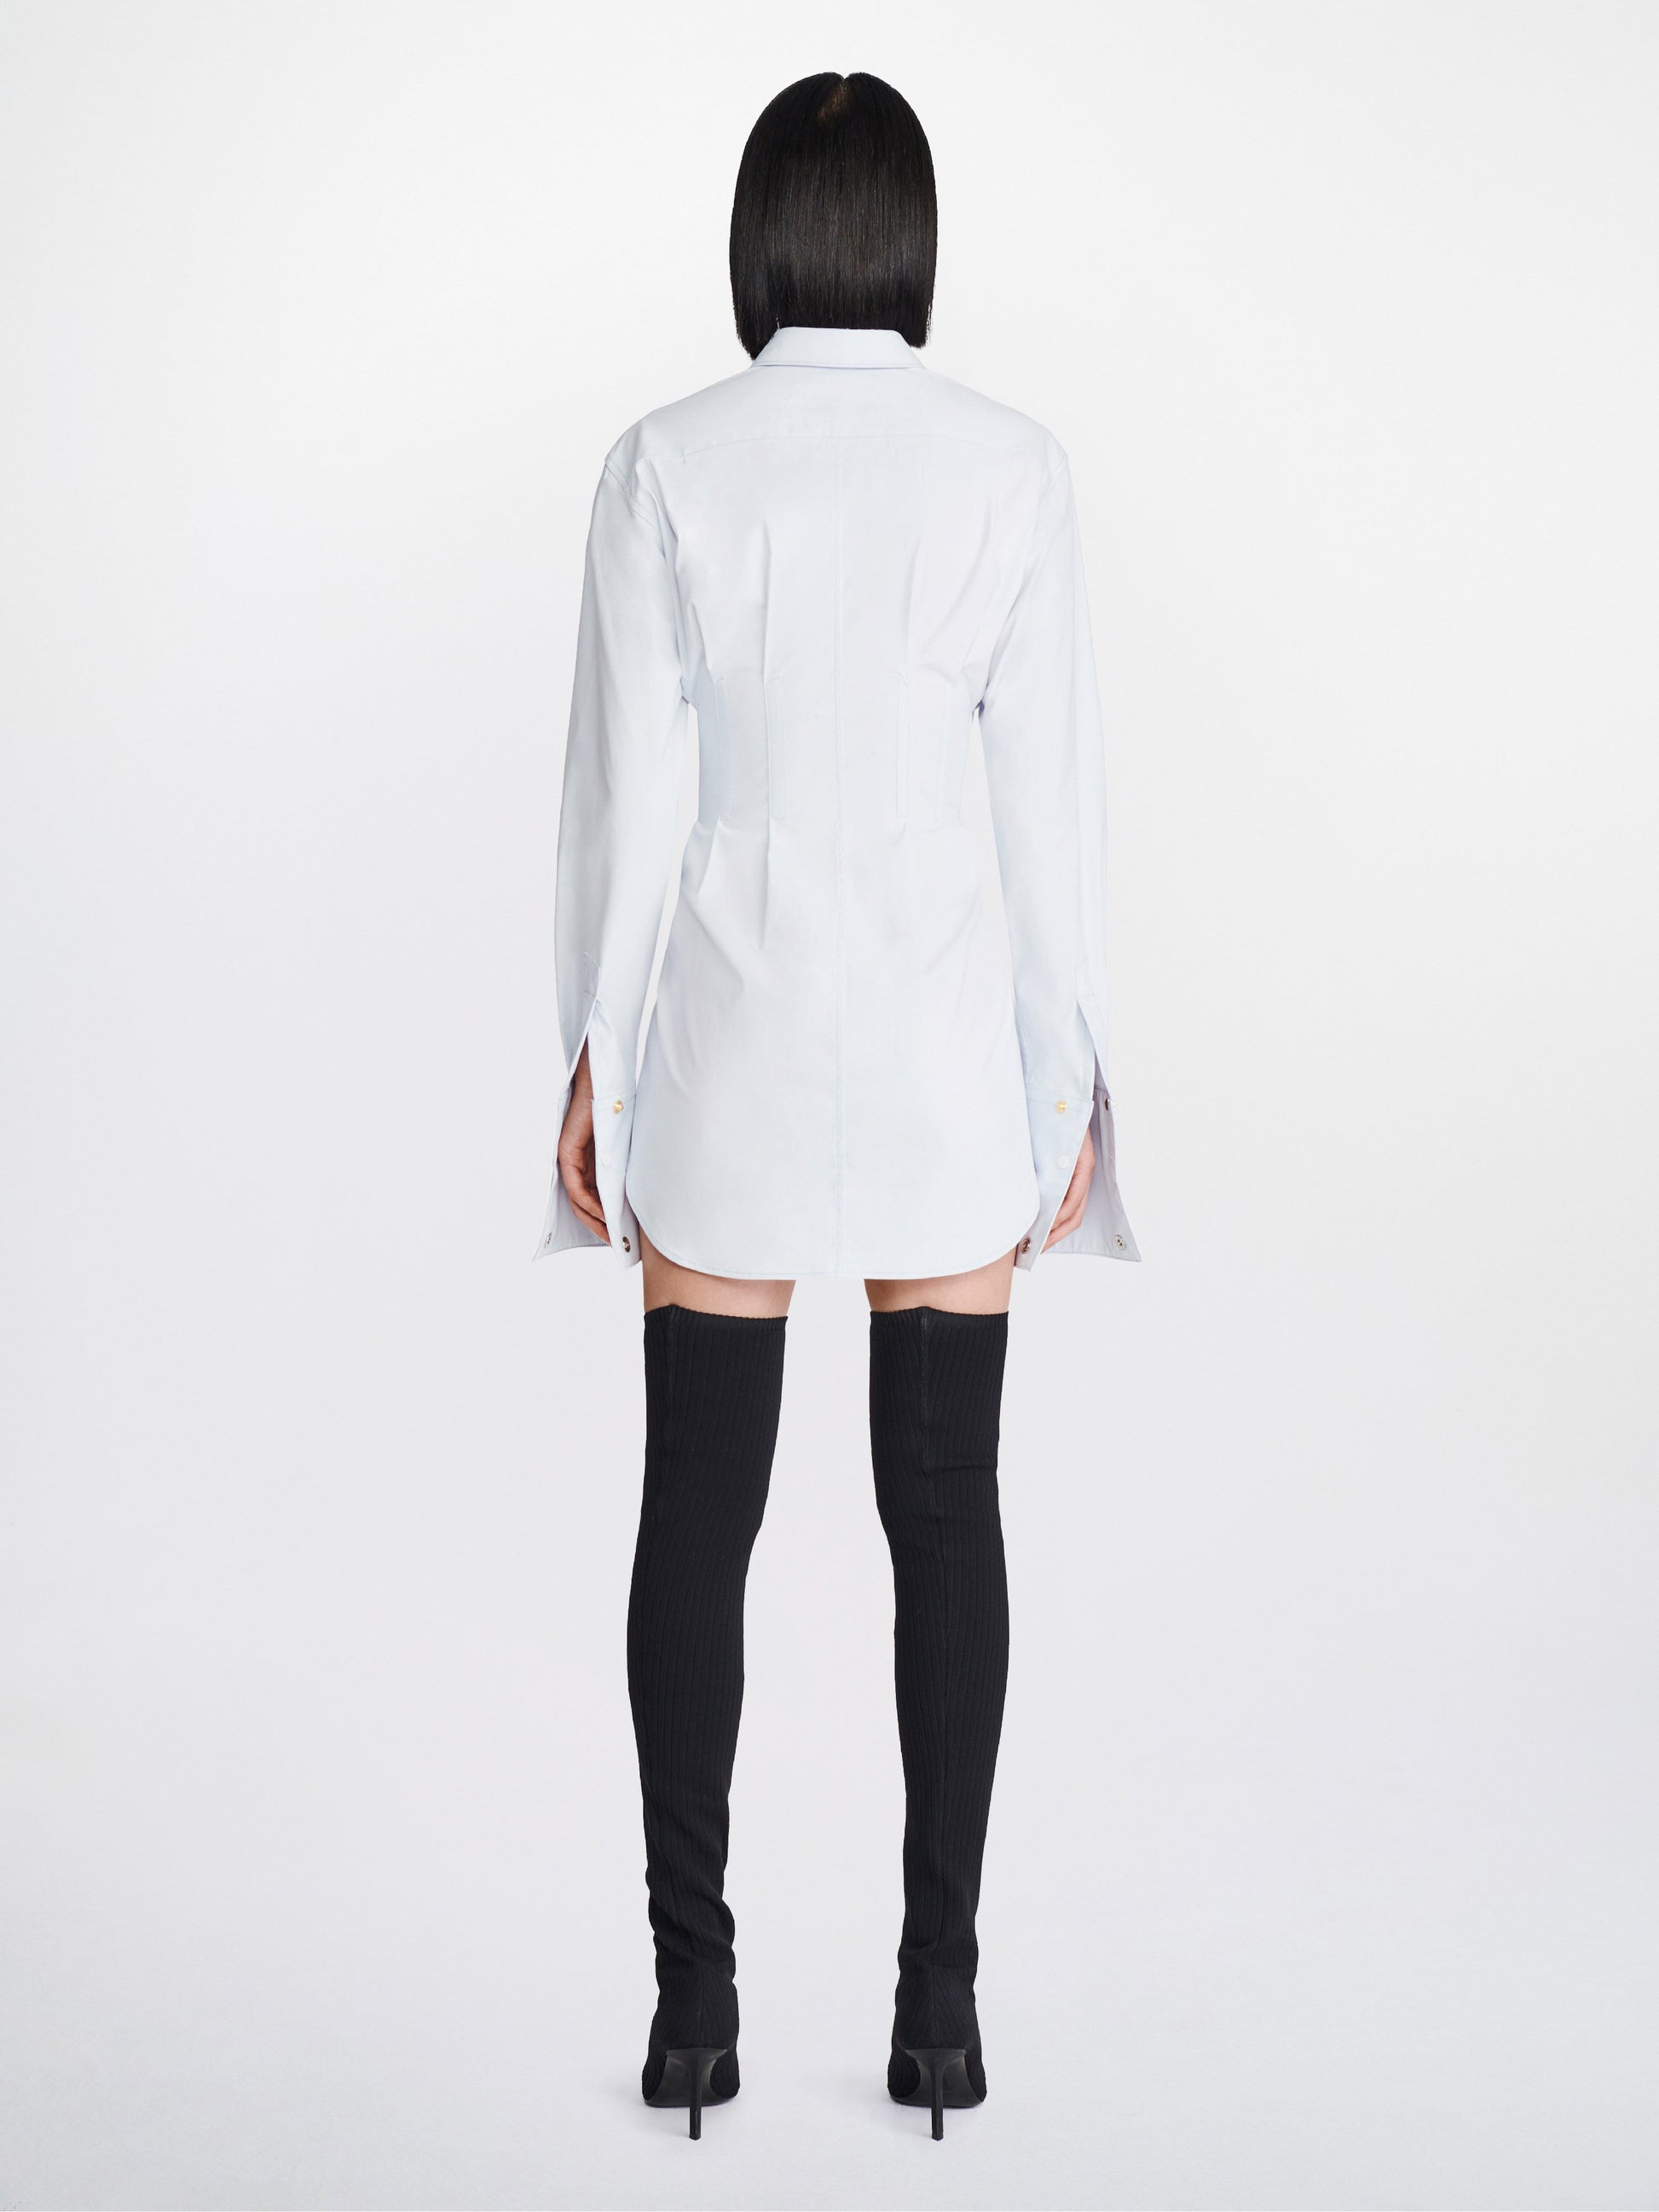 The Dion Lee Tuxedo Corset Shirt Dress in Steam available at The New Trend Australia